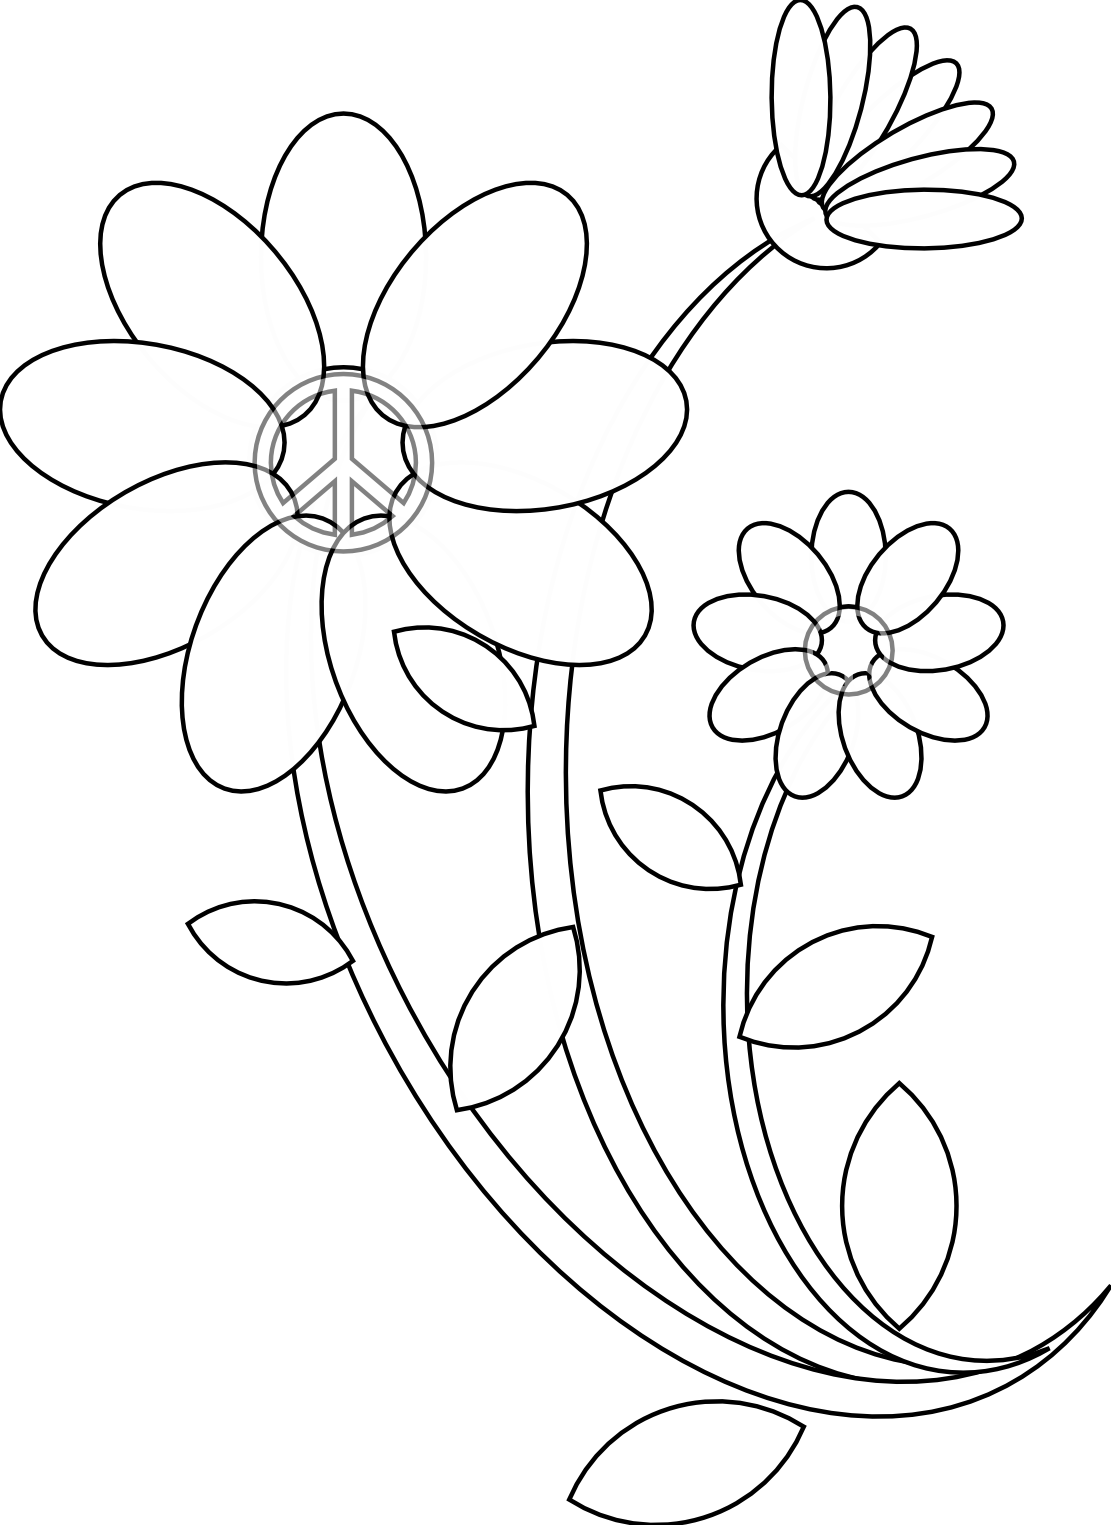 Free Line Drawing Of A Flower, Download Free Line Drawing Of A Flower